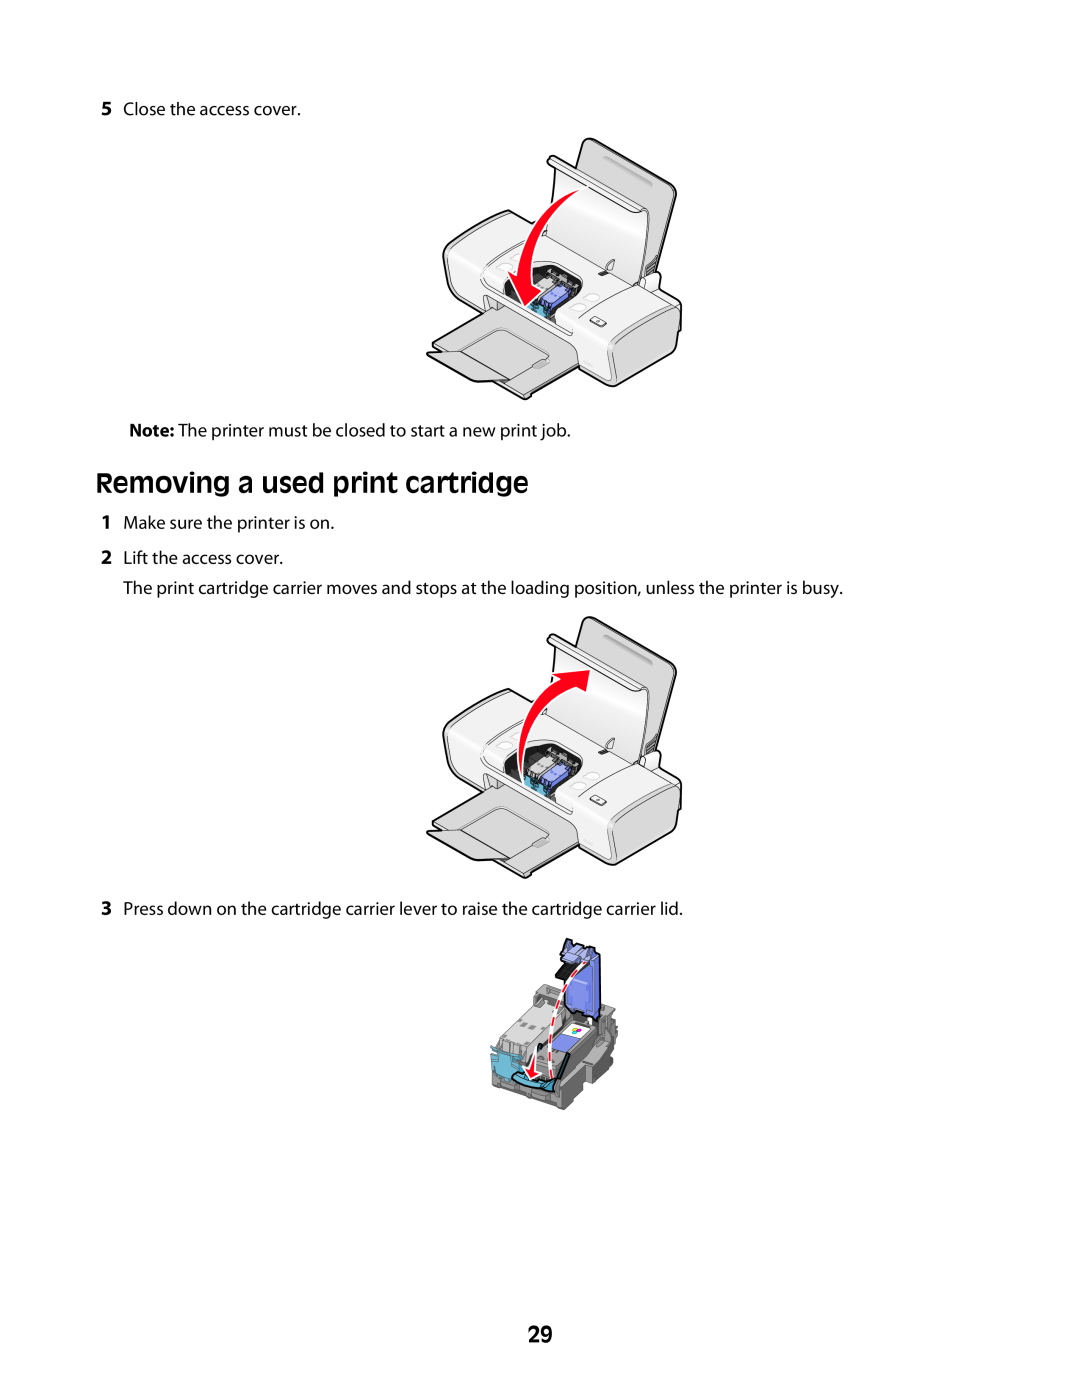 Lexmark Z2300 manual Removing a used print cartridge, 5Close the access cover, 1Make sure the printer is on 